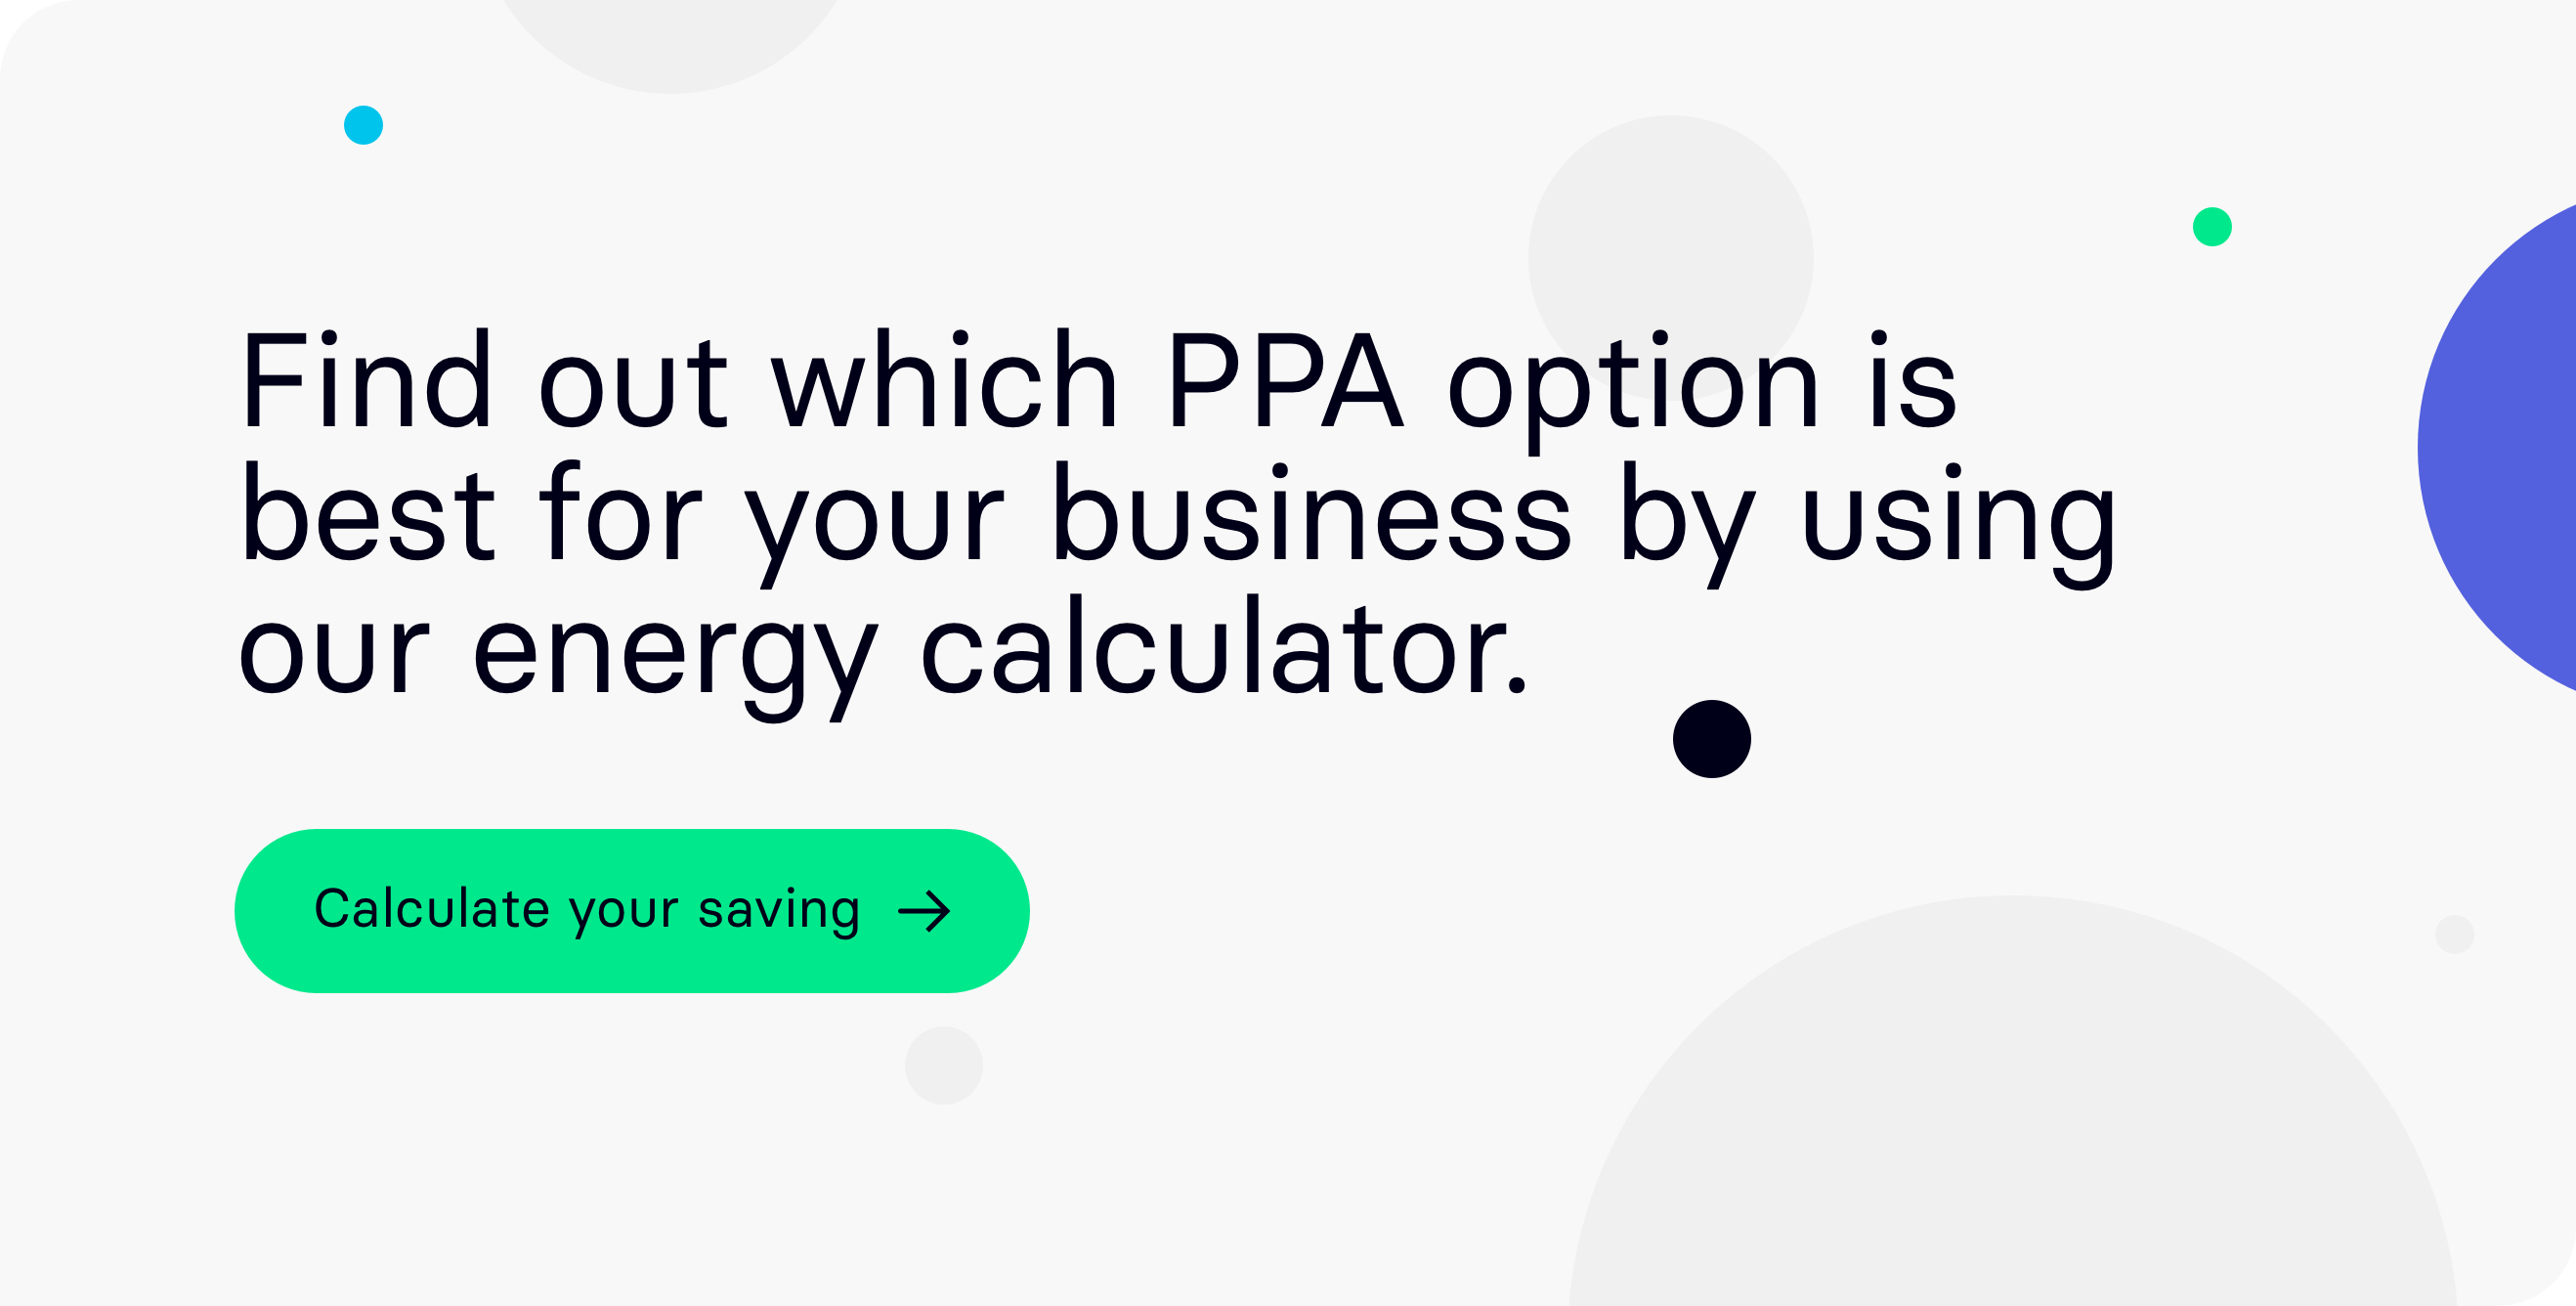 Find out which PPA option is best for your business by using our energy calculator